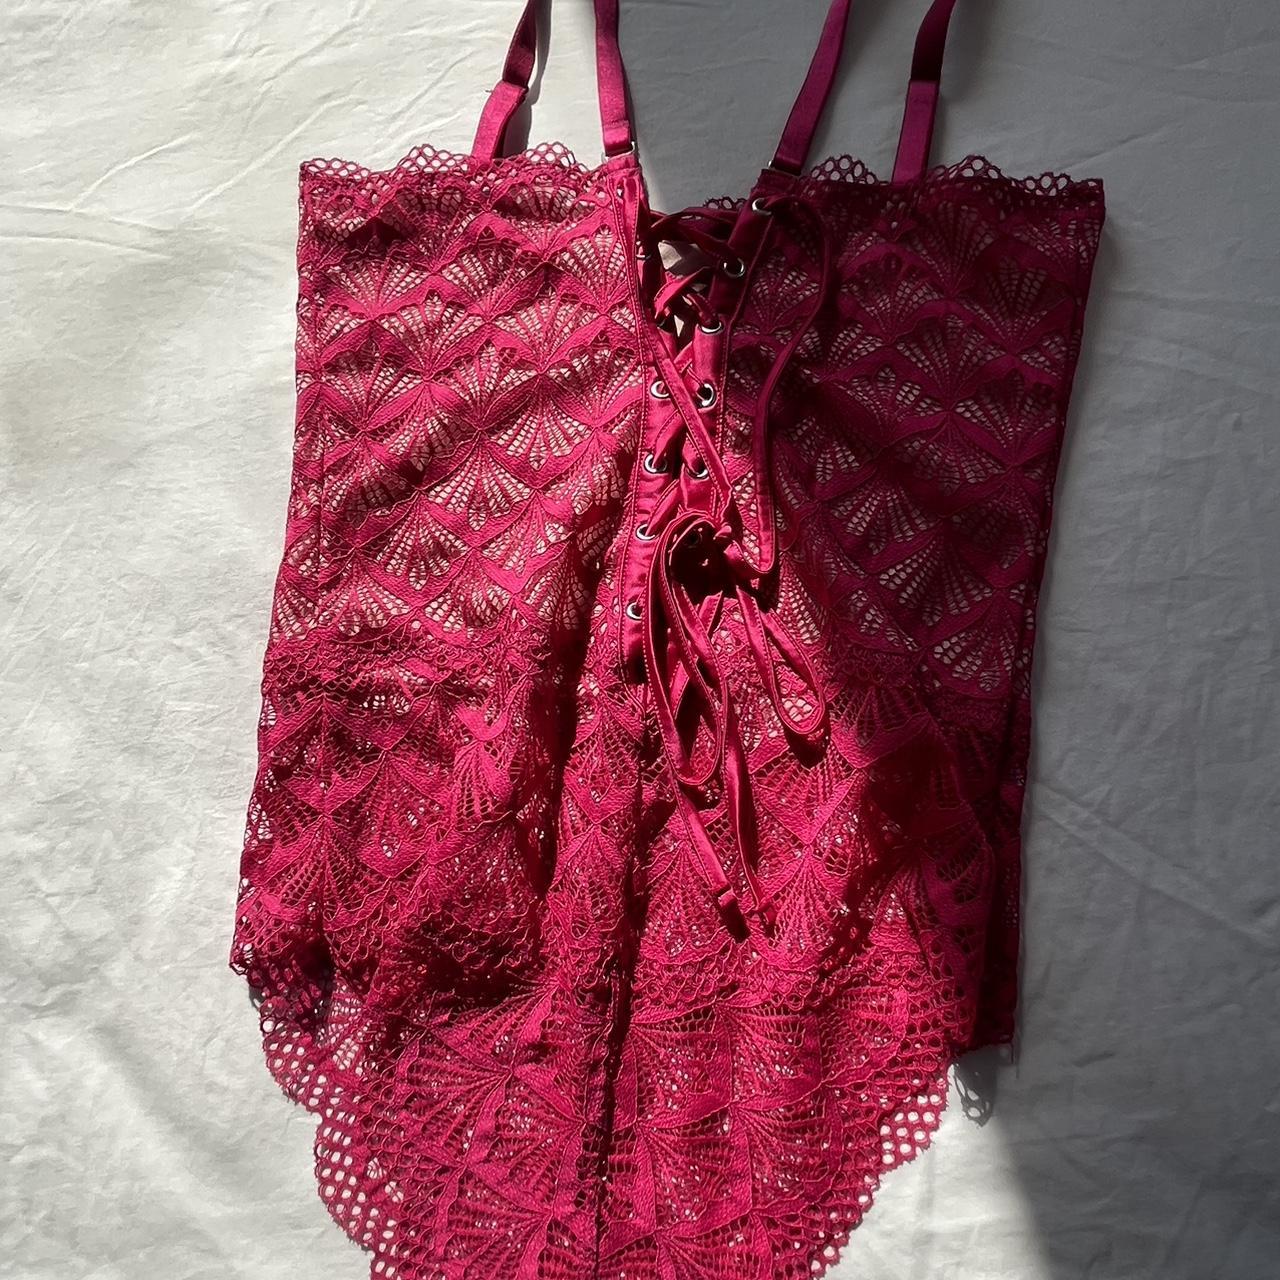 New Hot Pink Lace Lingerie Piece Size Small Hasn’t... - Depop